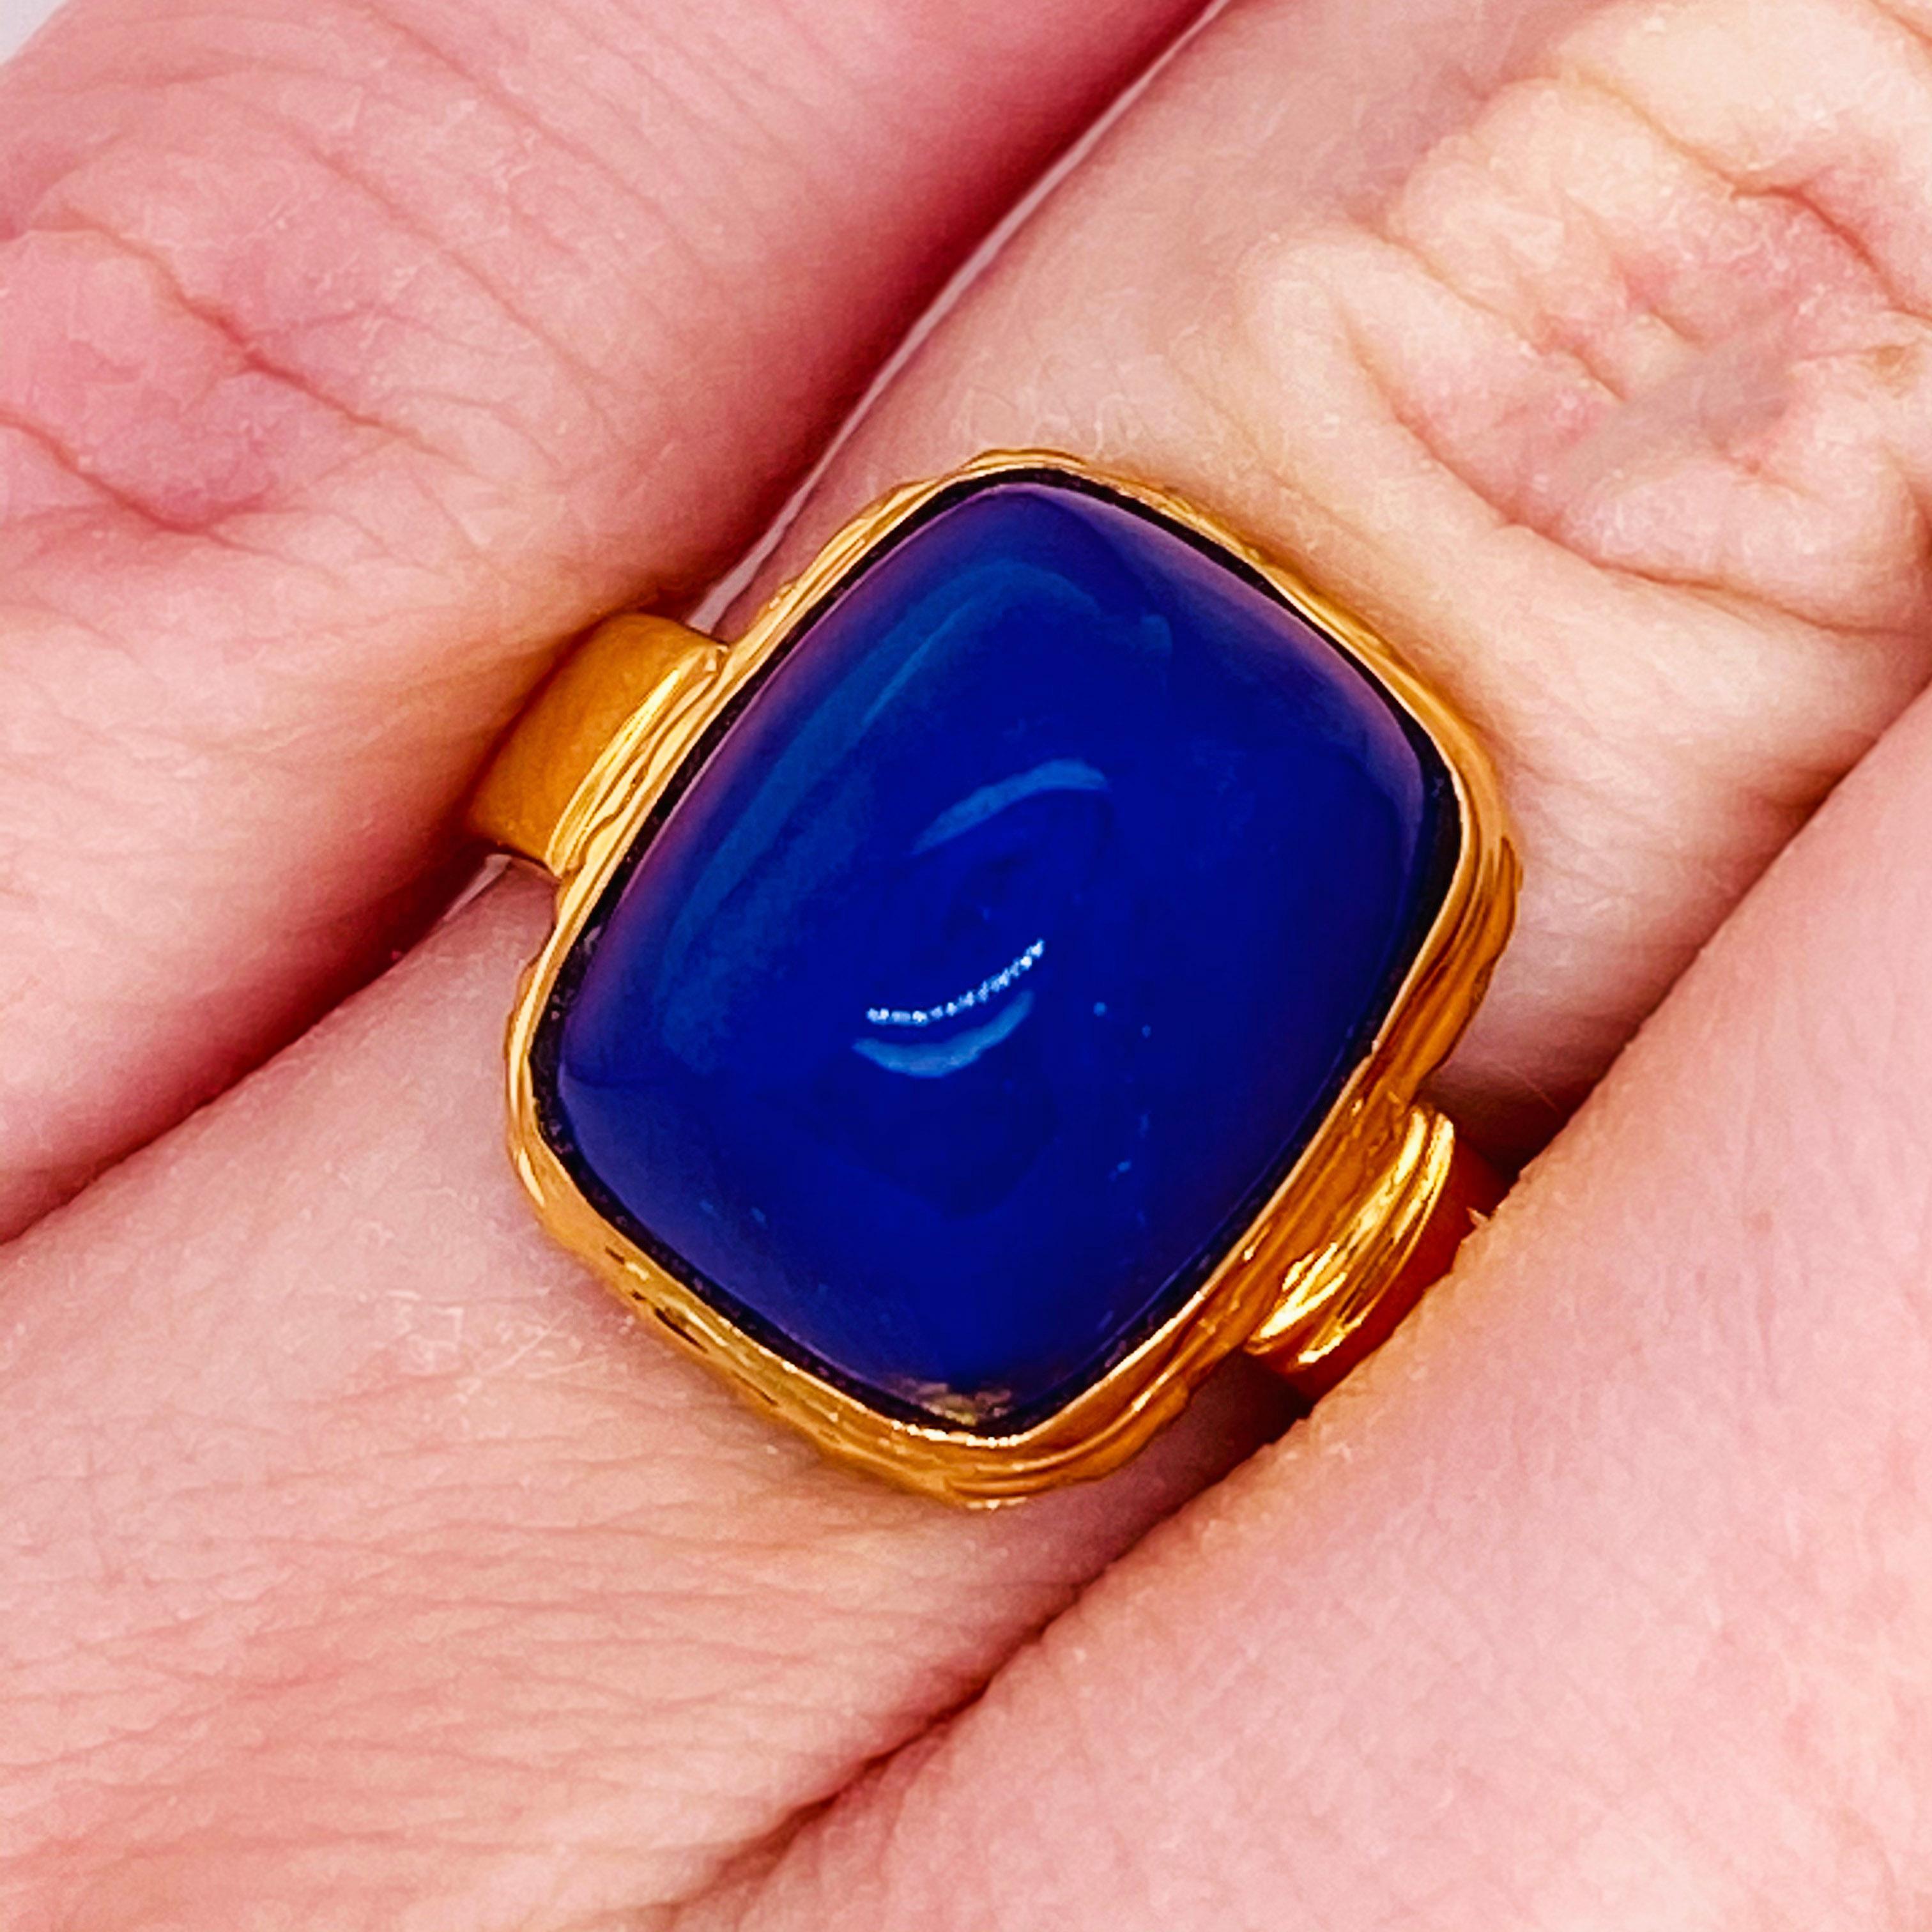 This stunningly beautiful blue lapis ring in 18kt yellow gold would make anyone thrilled to receive it! This ring provides a huge statement look that is very modern and classic at the same time! This ring is very fashionable and can add a touch of